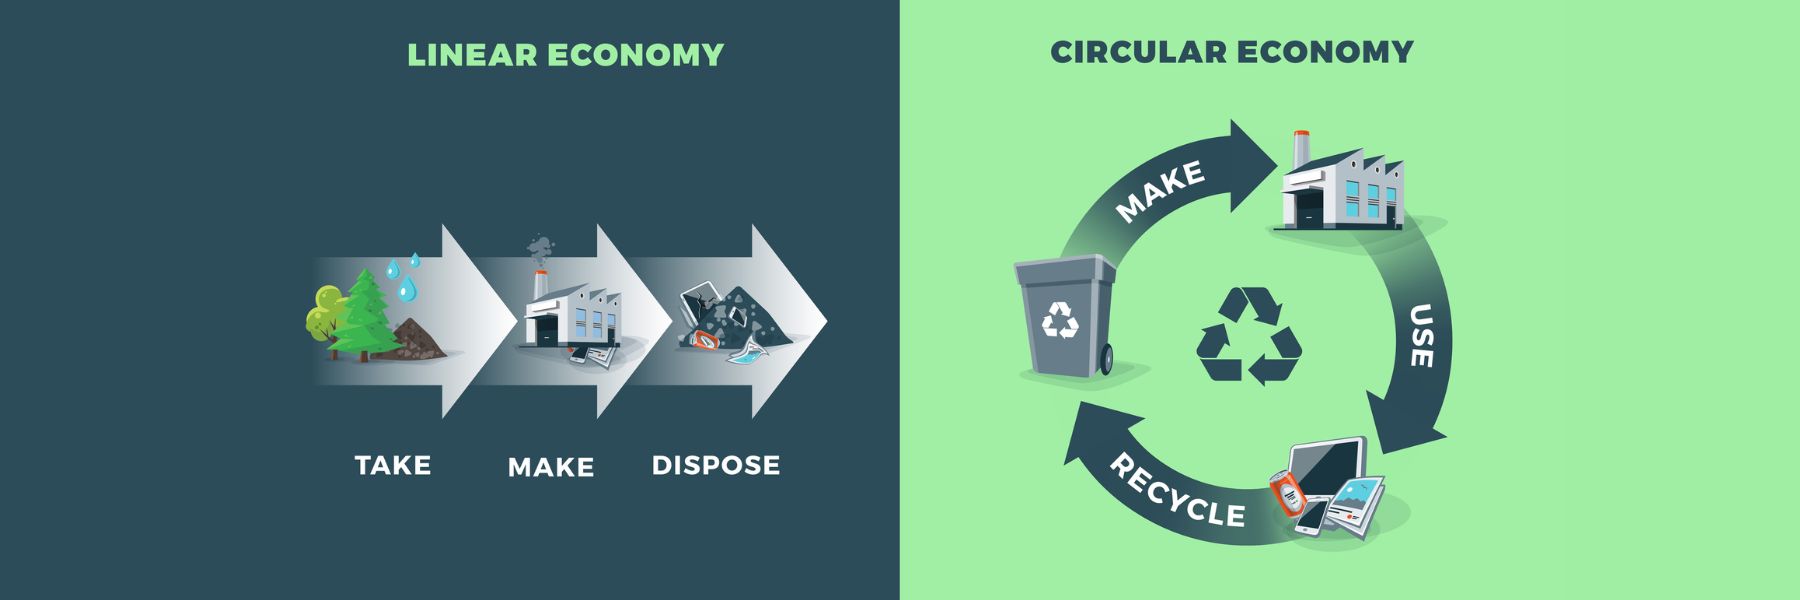 The Circular Economy is Better Than the Linear Economy